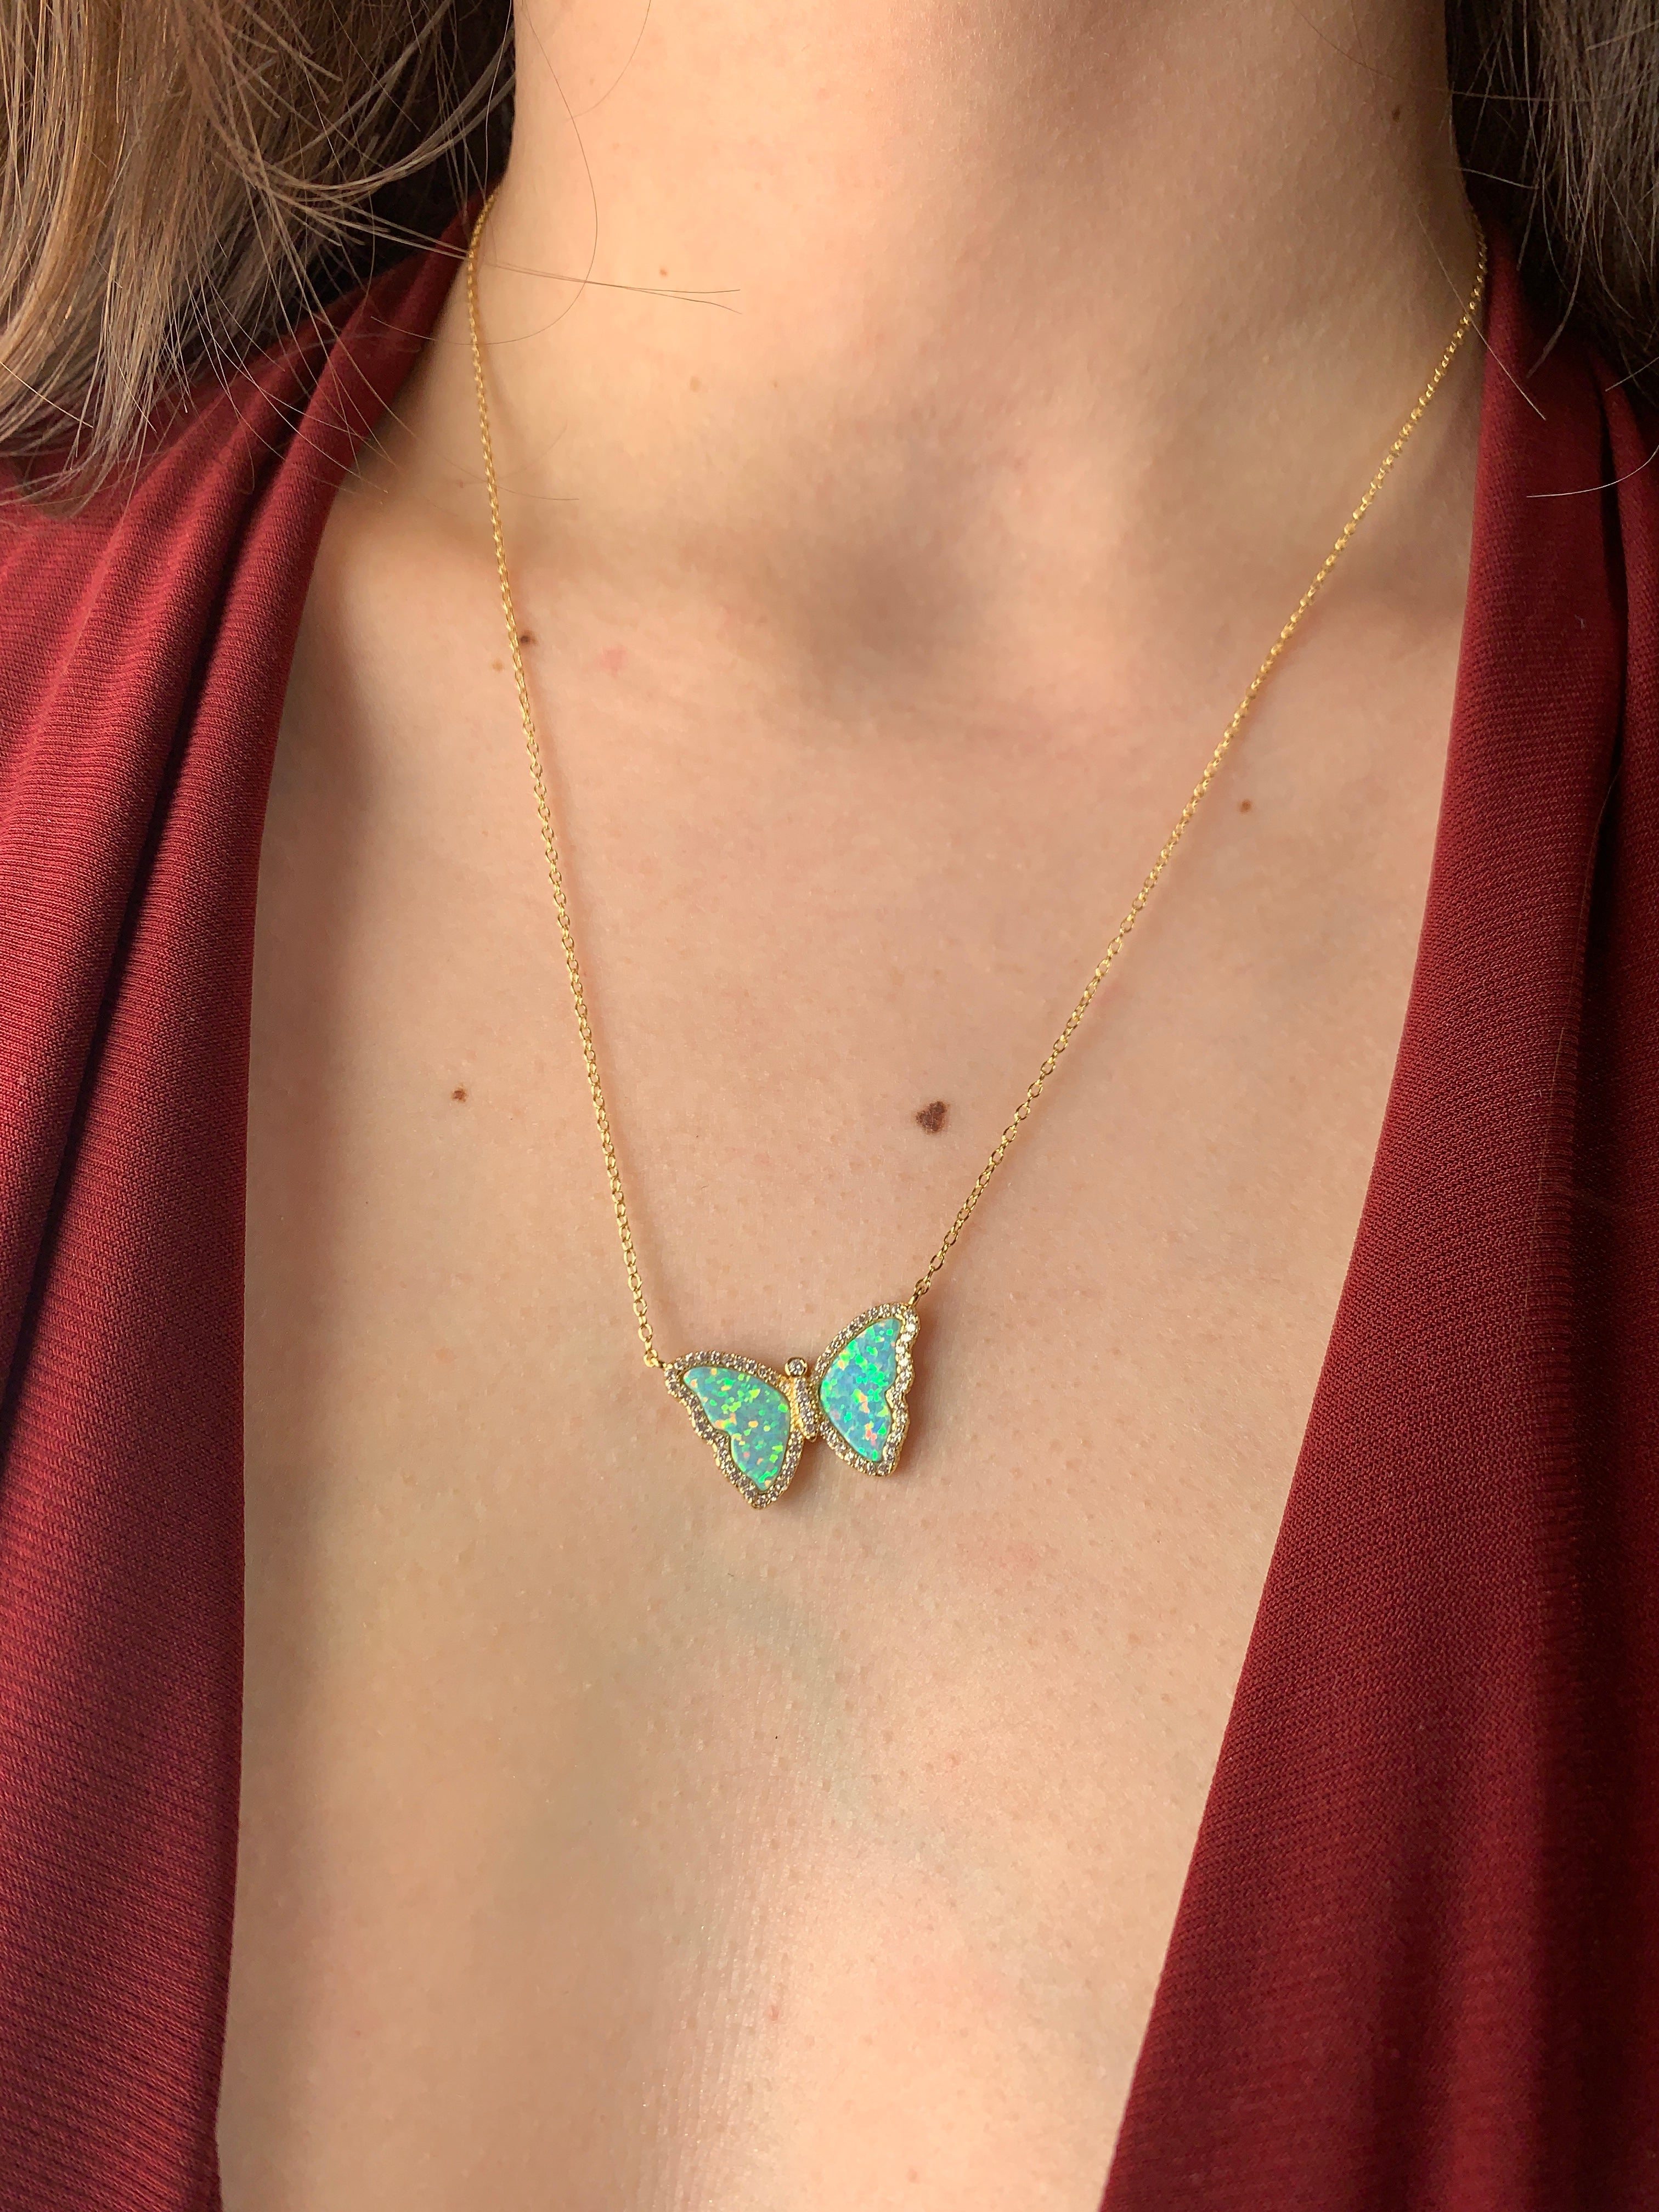 14k Yellow Gold Opal Butterfly Necklace on woman's neck